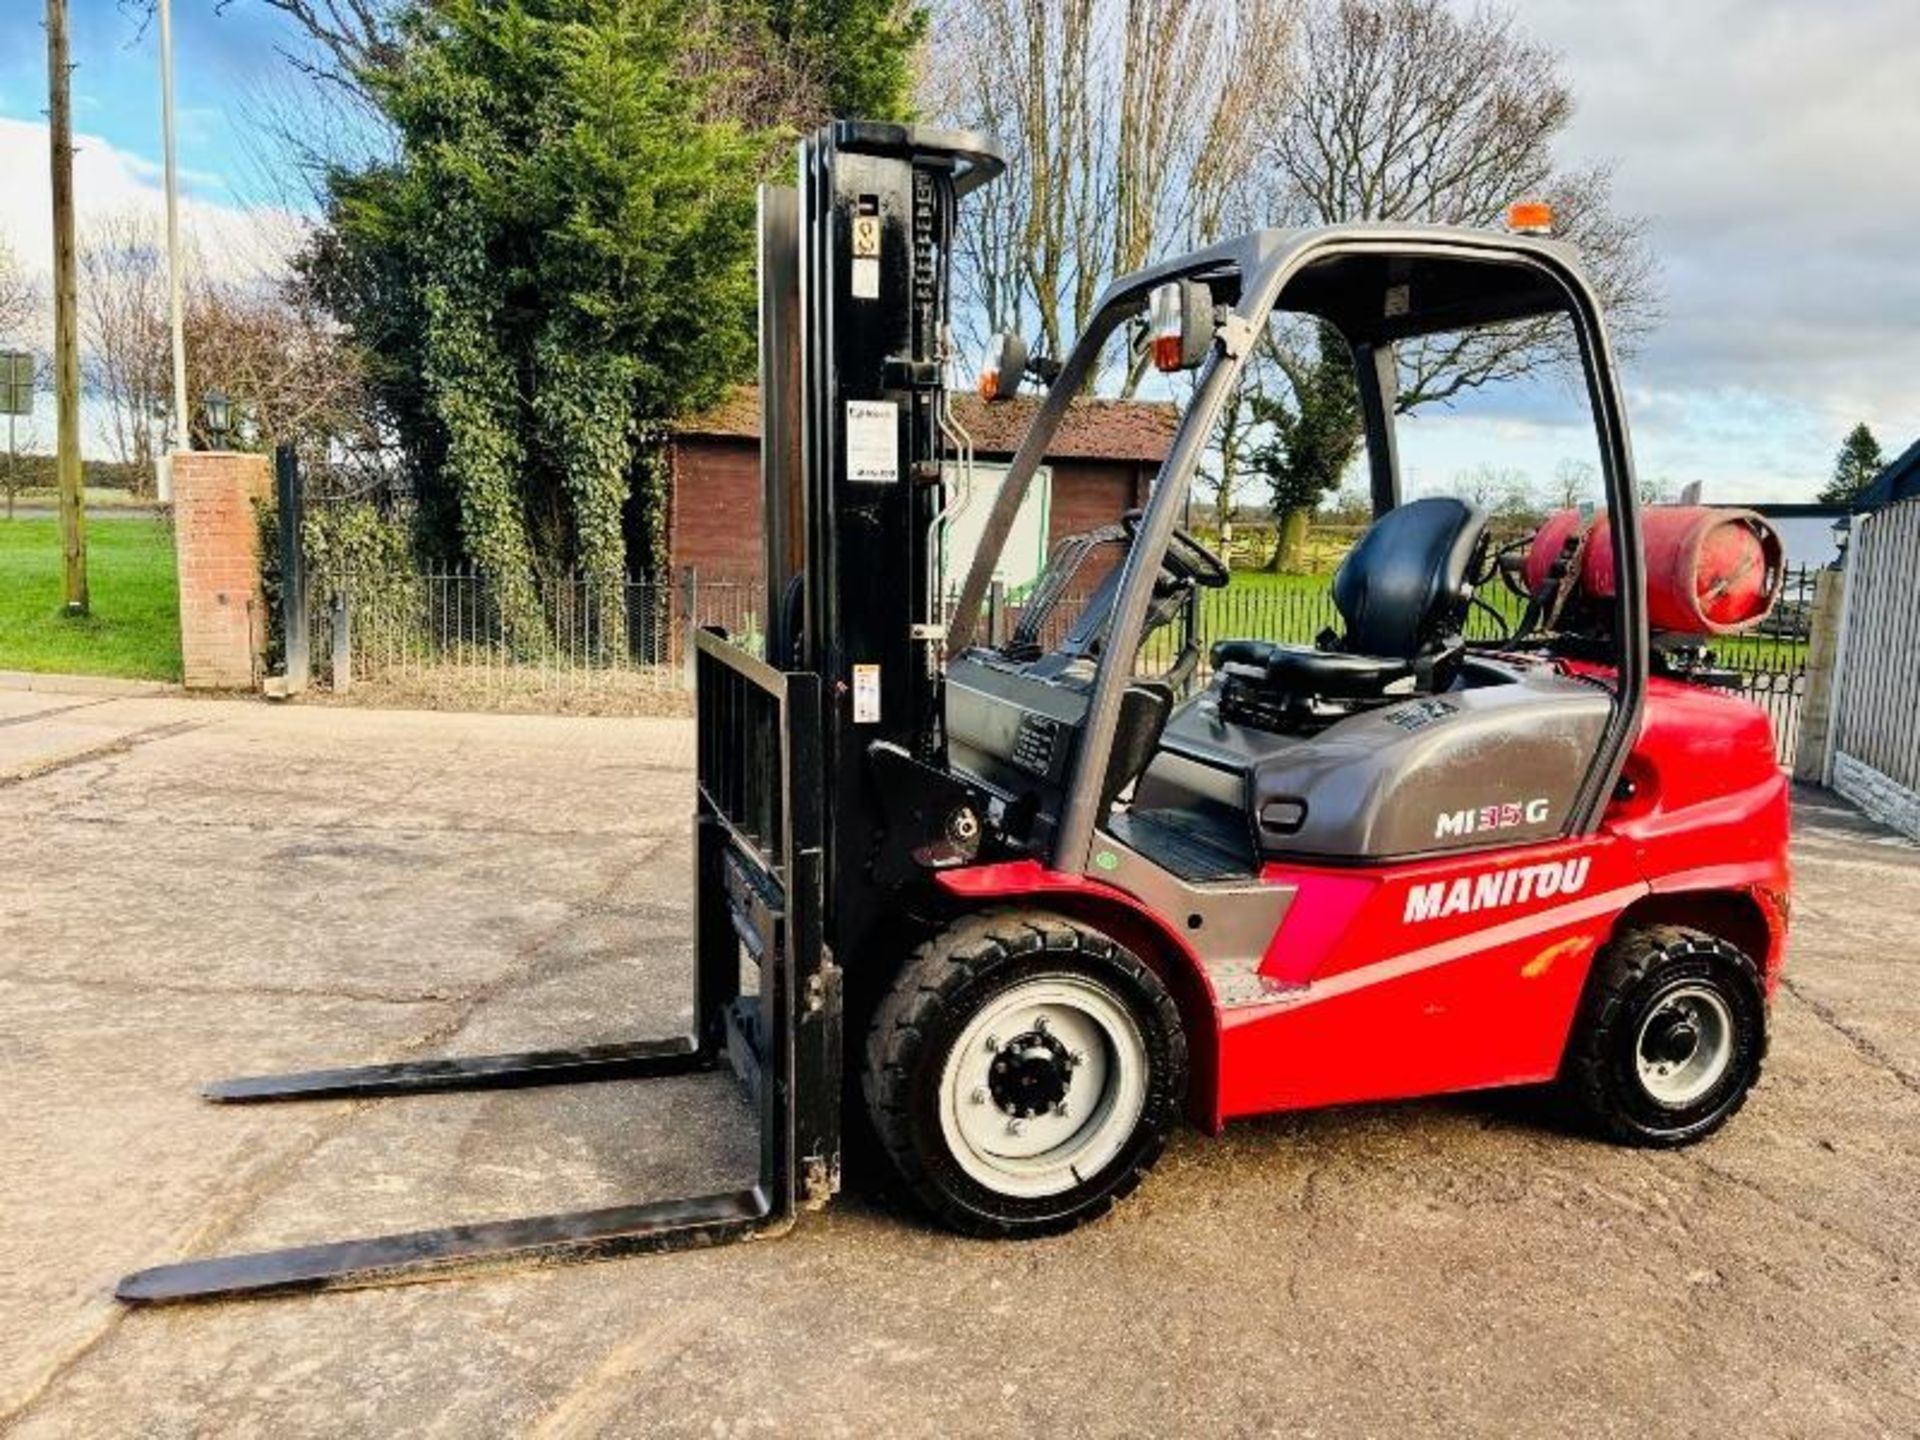 MANITOU MI35G CONTAINER SPEC FORKLIFT *YEAR 2016, 2070 HOURS* C/W SIDE SHIFT - Image 5 of 18